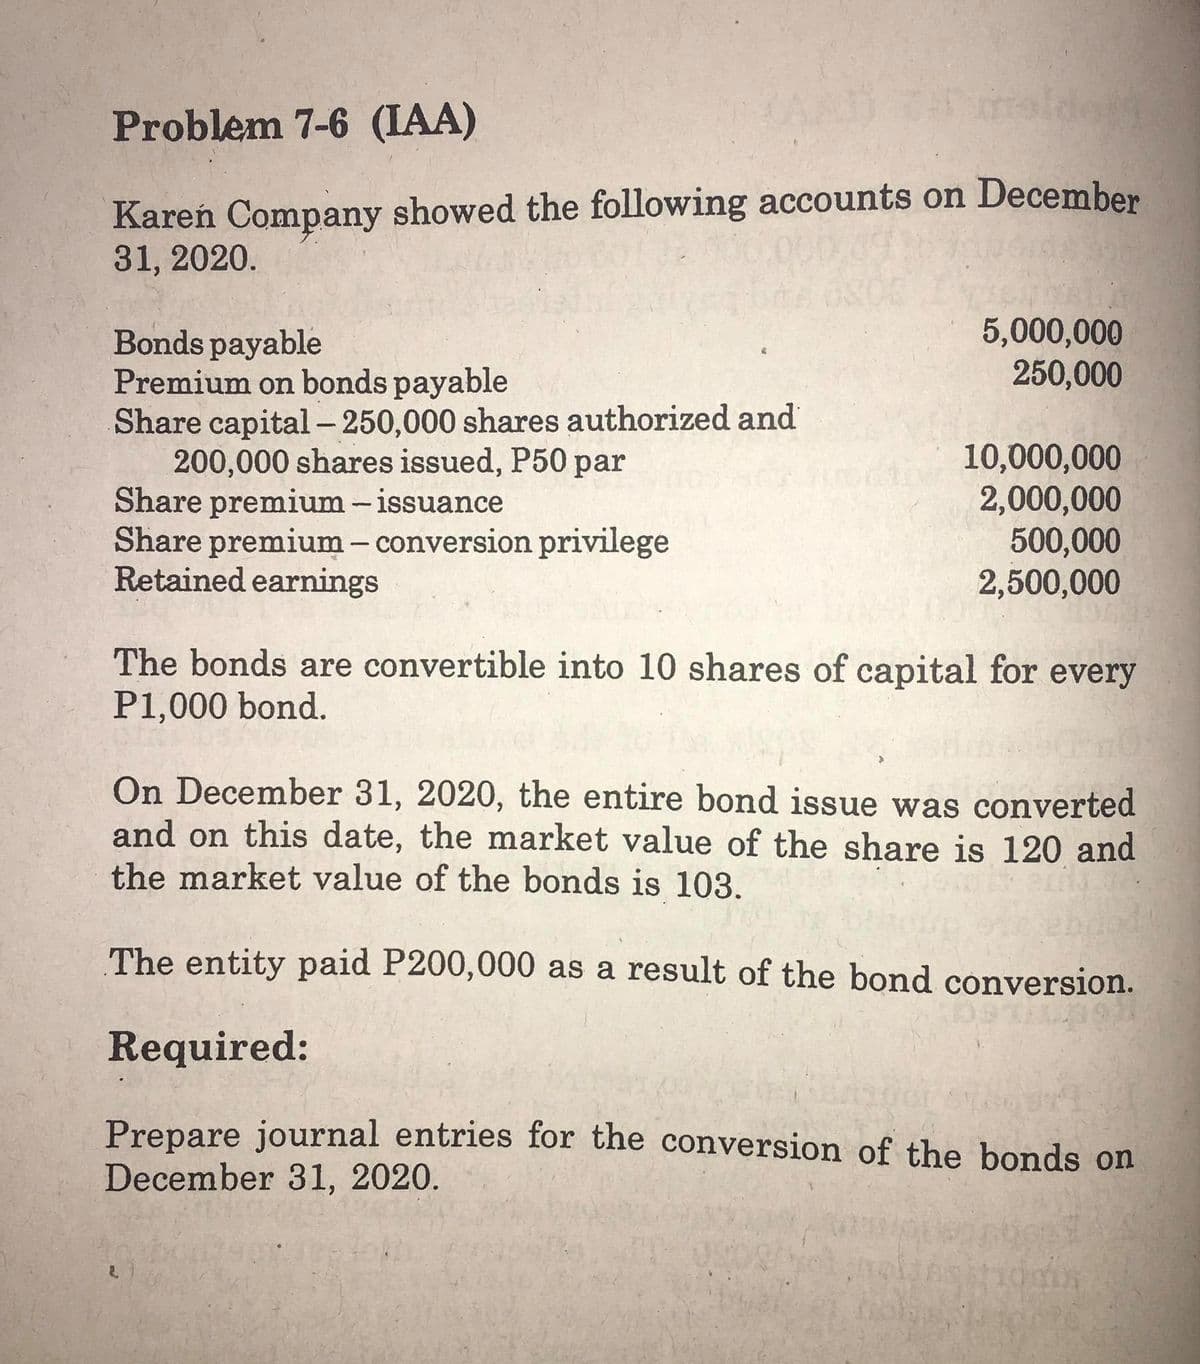 Problem 7-6 (IAA)
Kareń Company showed the following accounts on December
31, 2020.
5,000,000
250,000
Bonds payable
Premium on bonds payable
Share capital – 250,000 shares authorized and
200,000 shares issued, P50 par
Share premium -issuance
Share premium - conversion privilege
Retained earnings
10,000,000
2,000,000
500,000
2,500,000
The bonds are convertible into 10 shares of capital for every
P1,000 bond.
On December 31, 2020, the entire bond issue was converted
and on this date, the market value of the share is 120 and
the market value of the bonds is 103.
The entity paid P200,000 as a result of the bond conversion.
Required:
Prepare journal entries for the conversion of the bonds on
December 31, 2020.
